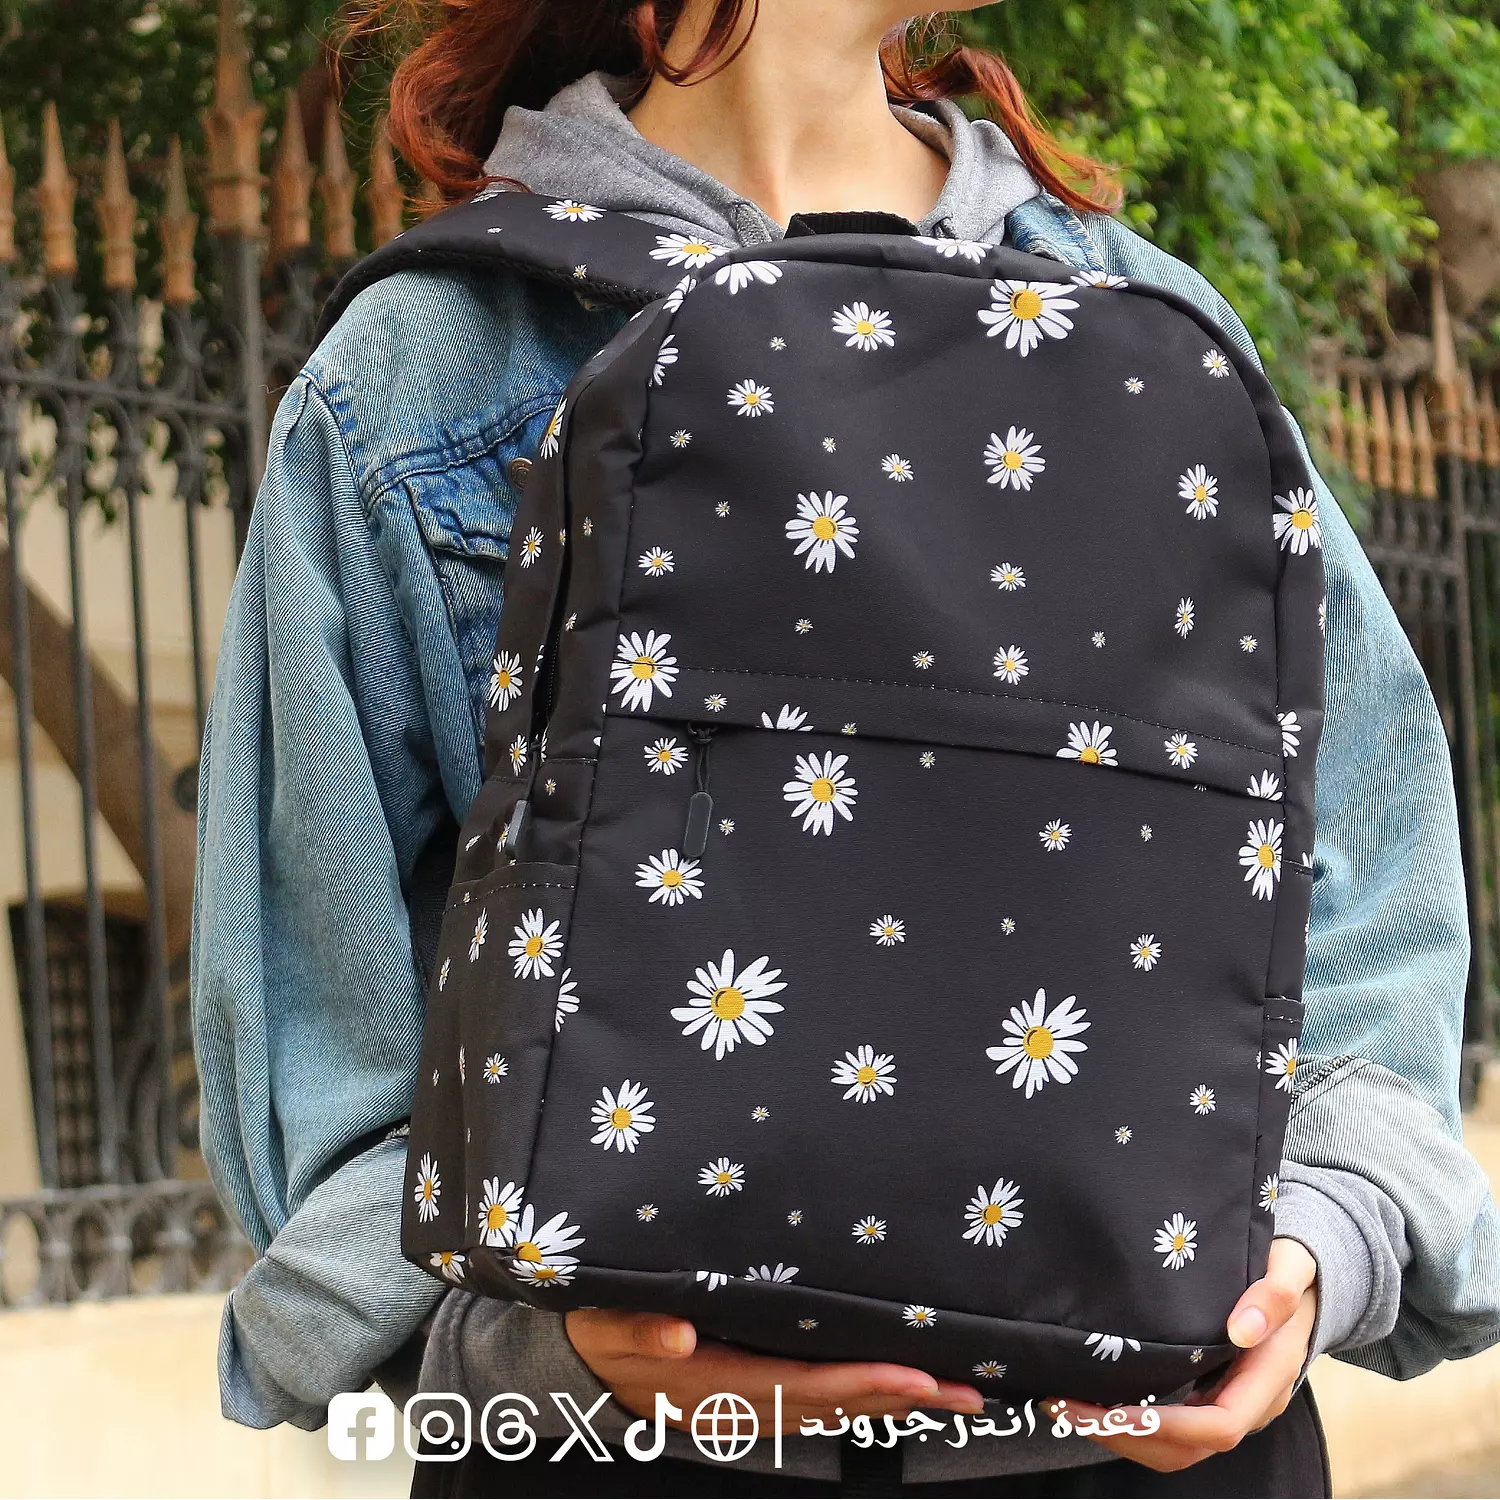 Black 🖤 Daisy 💮 Backpack 🎒 hover image